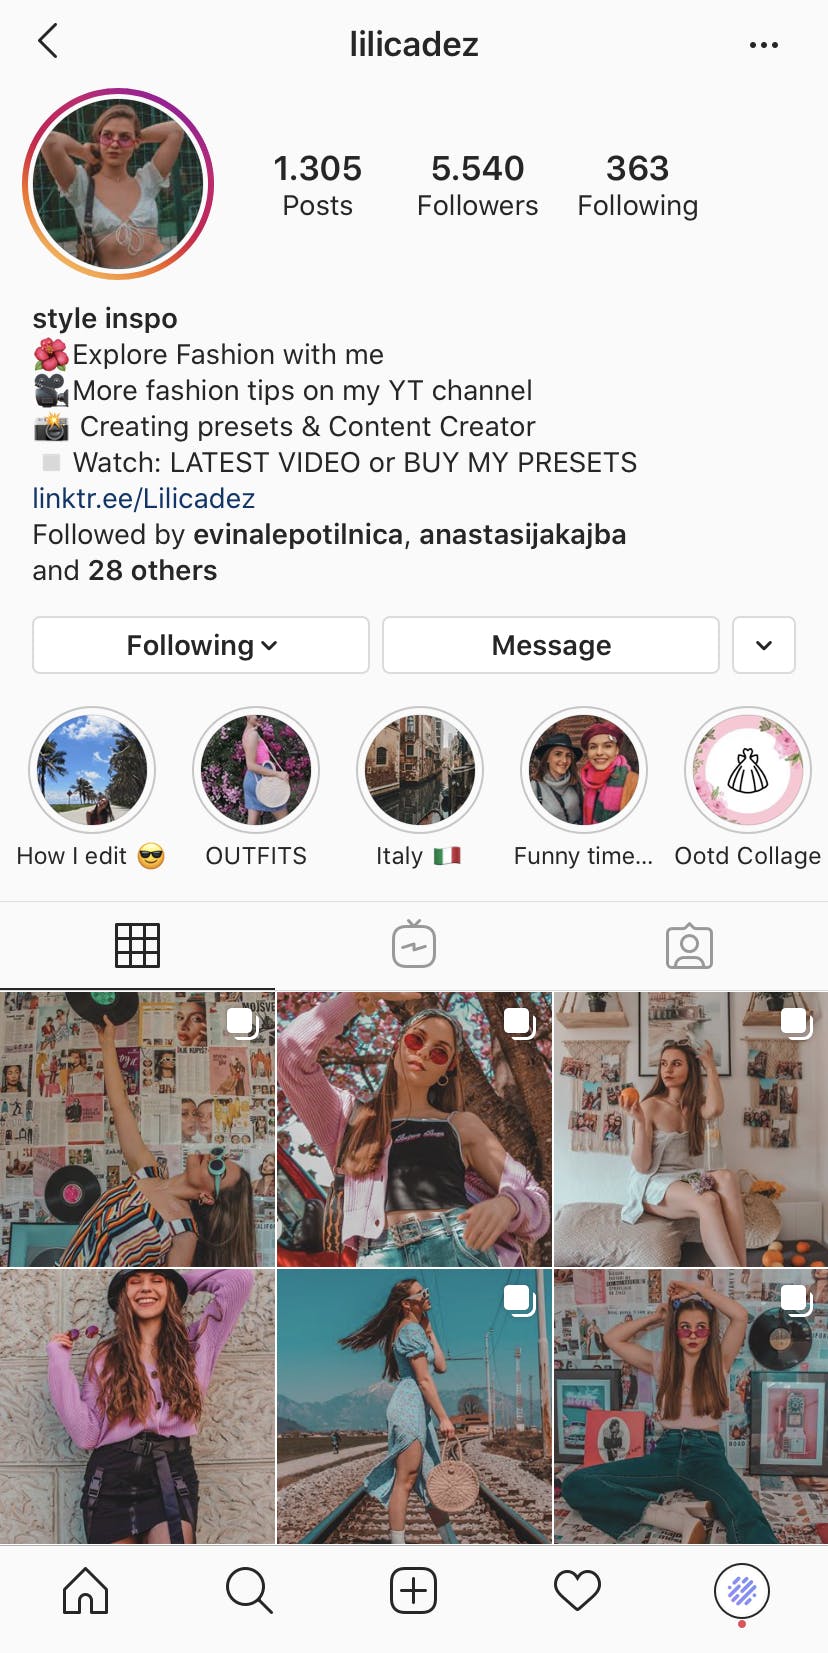 How To Become A Successful Instagram Influencer | Influee